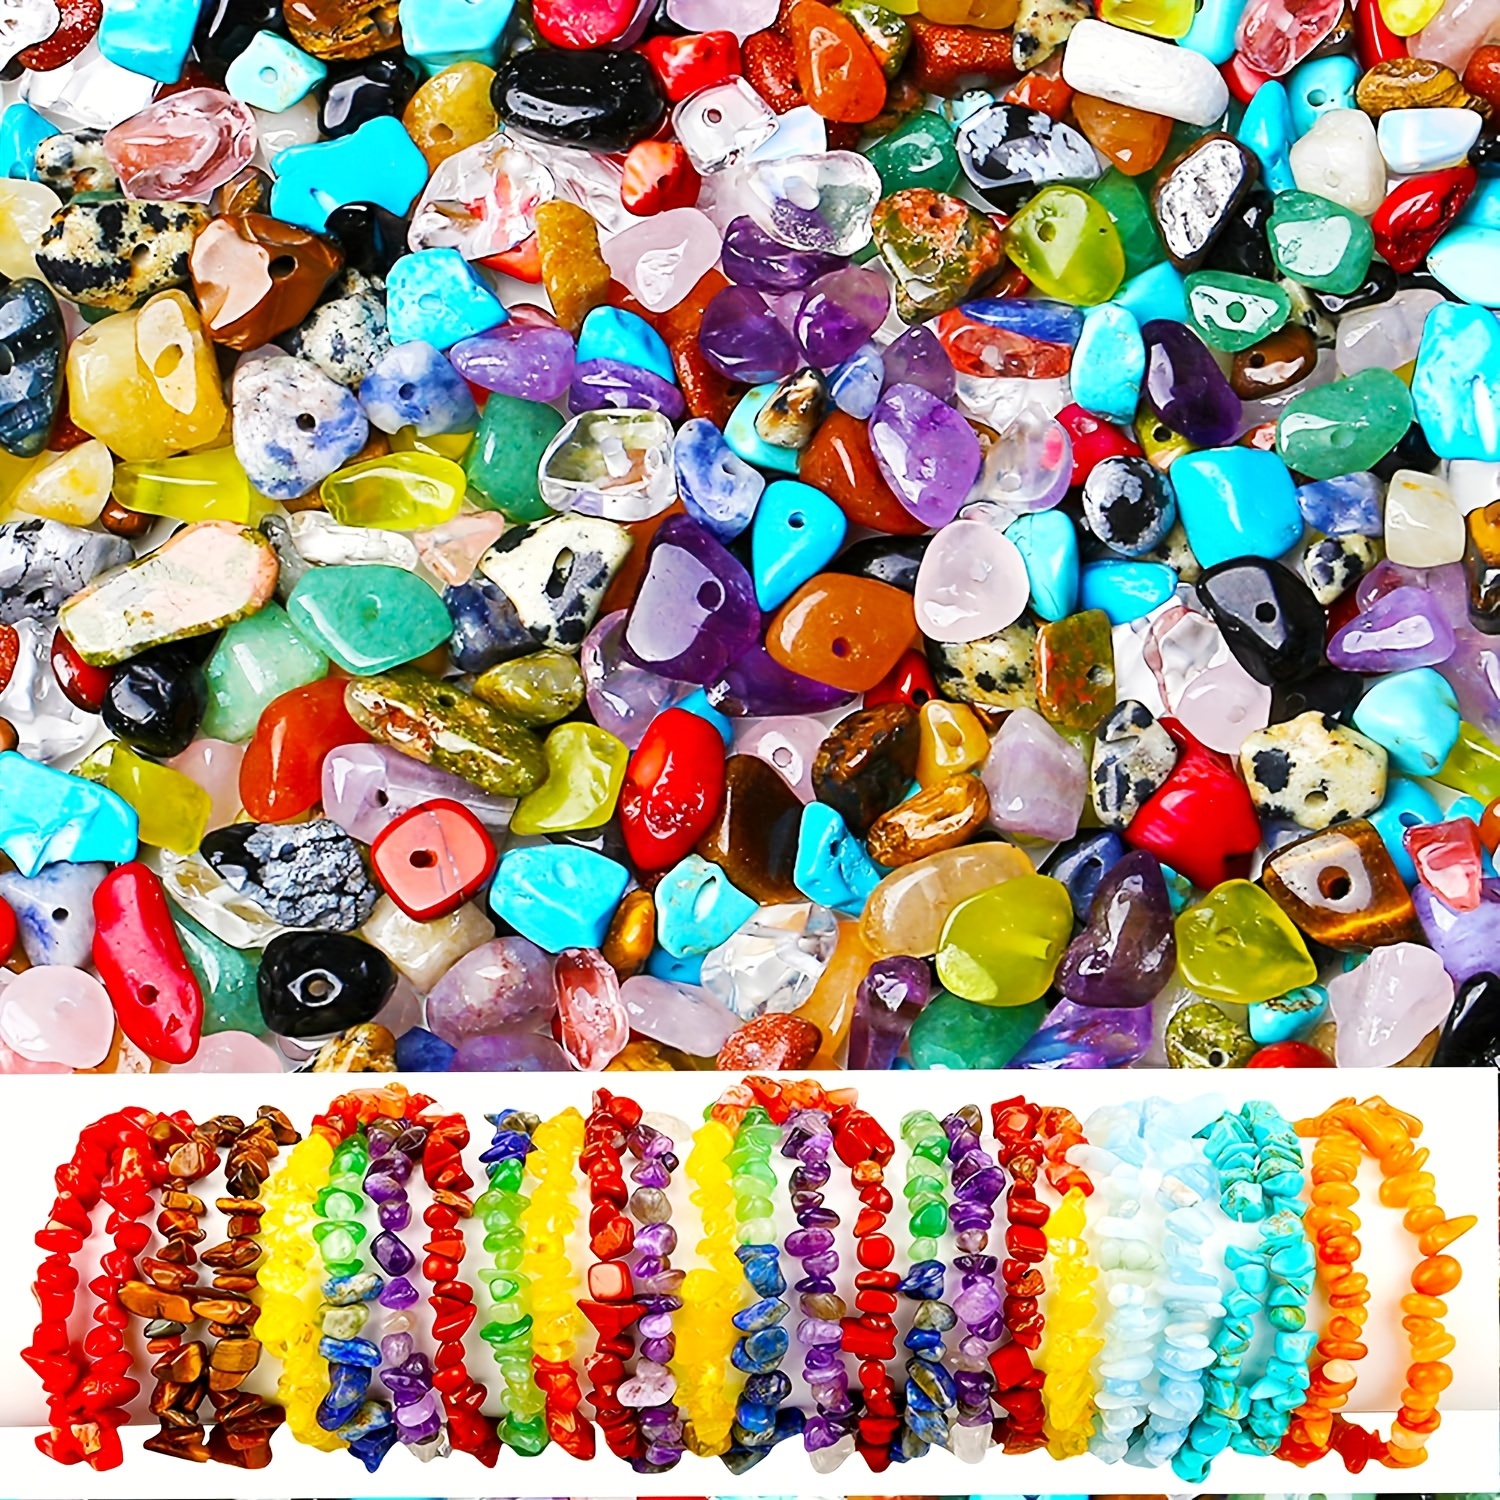 

500pcs Multicolor 5-8mm Crystal Stone Irregular Loose Rocks Bulk Hole Drilled Natural Chips Beads For Jewelry Making Diy Special Bracelet Necklace Beaded Crafts Small Business Supplies